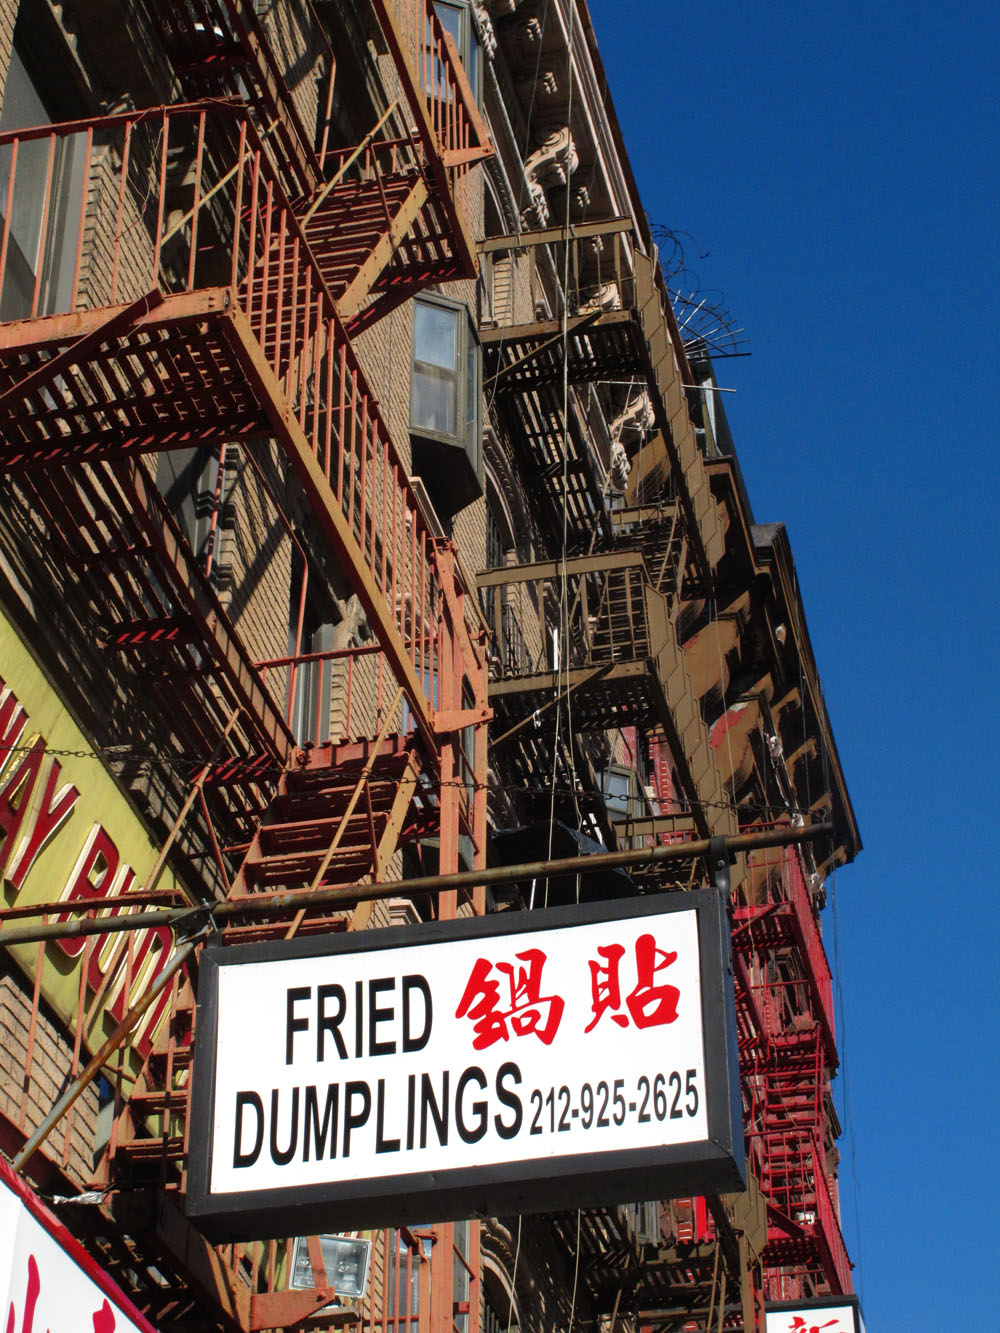 sign for s dumpling shop in Chinatown NYC